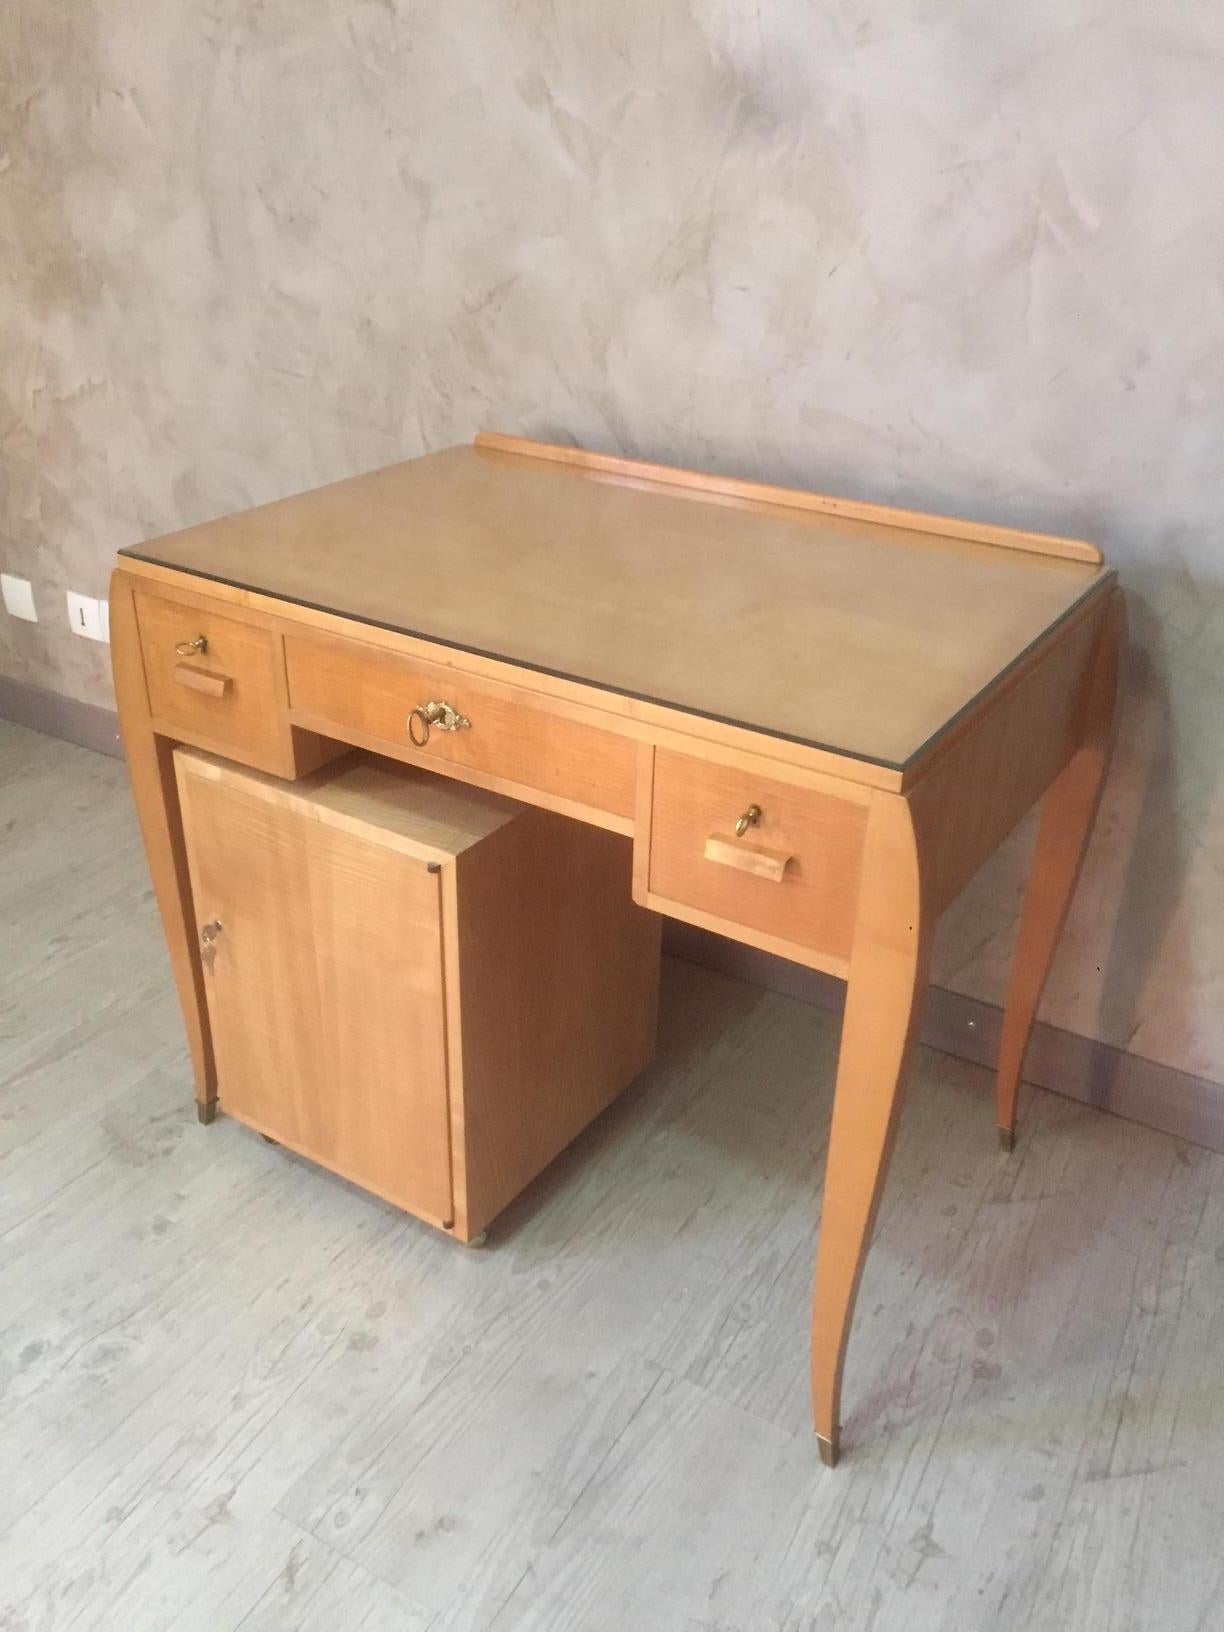 Very nice 20th century French desk with a rolling drawer from the 1950s.
There is a glass top. Three drawers with originals keys. gilded brass fitting.
 